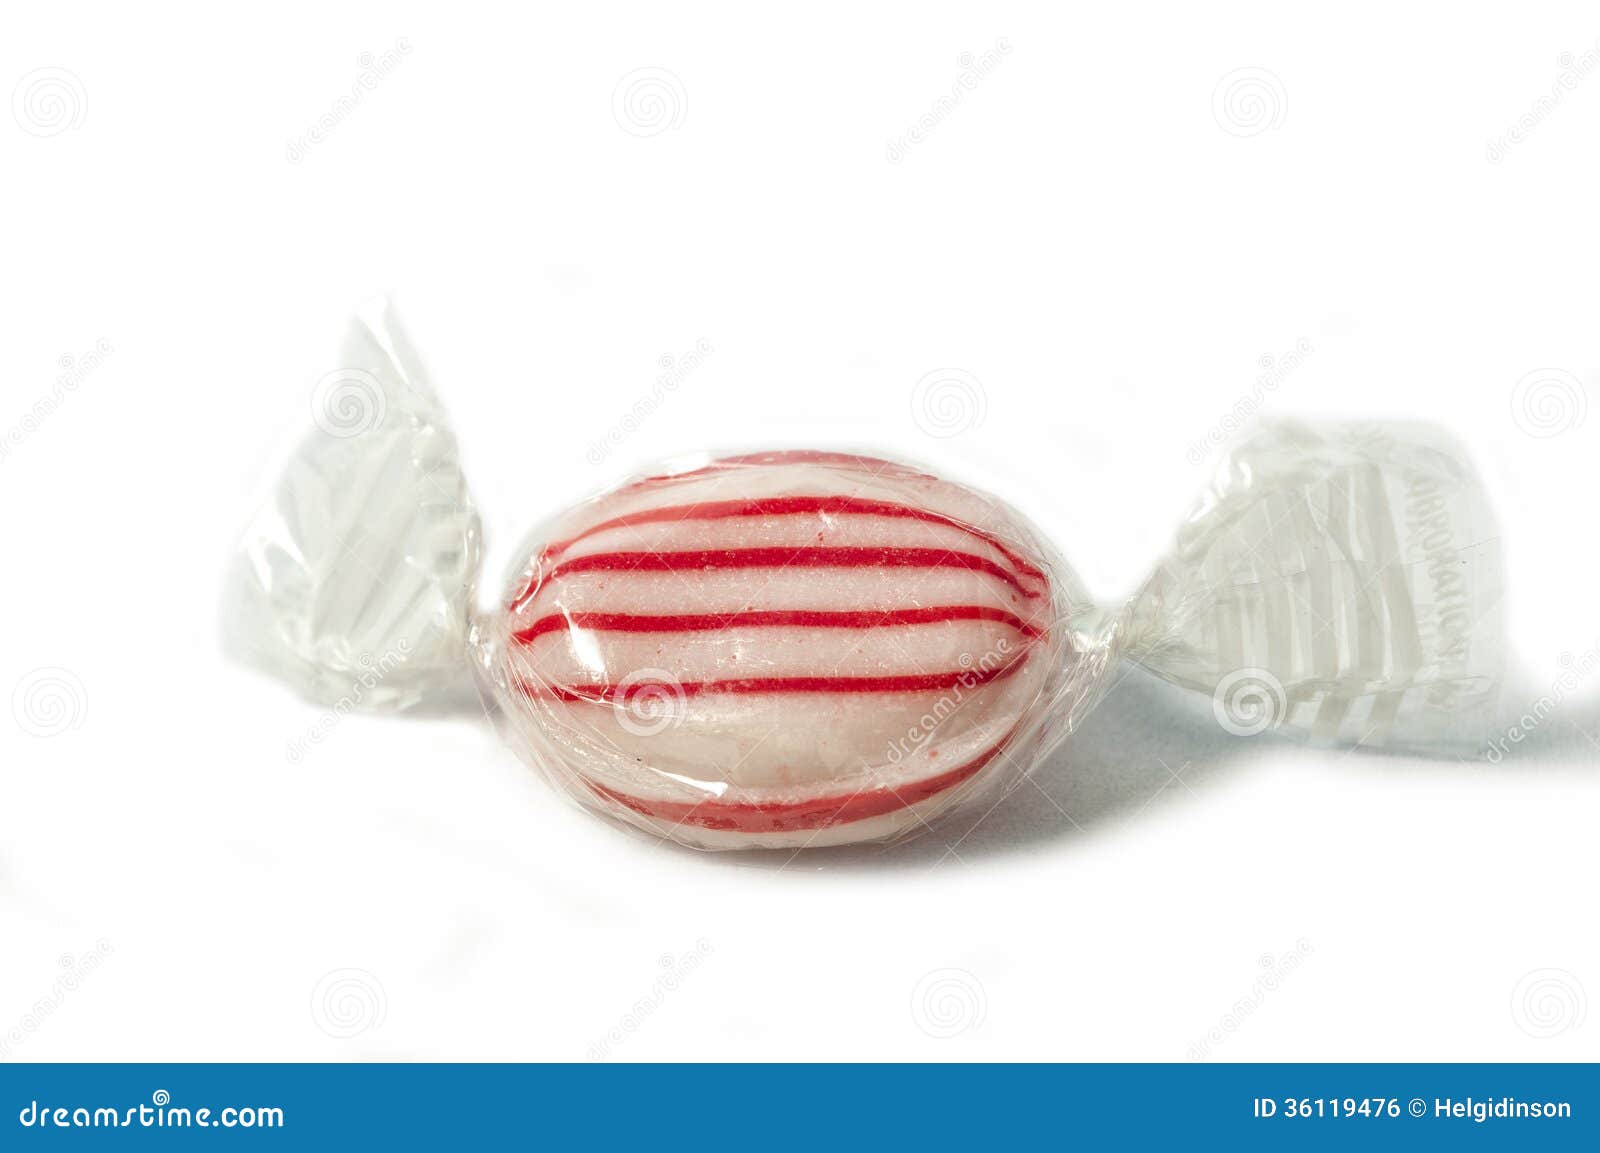 spearmint candy